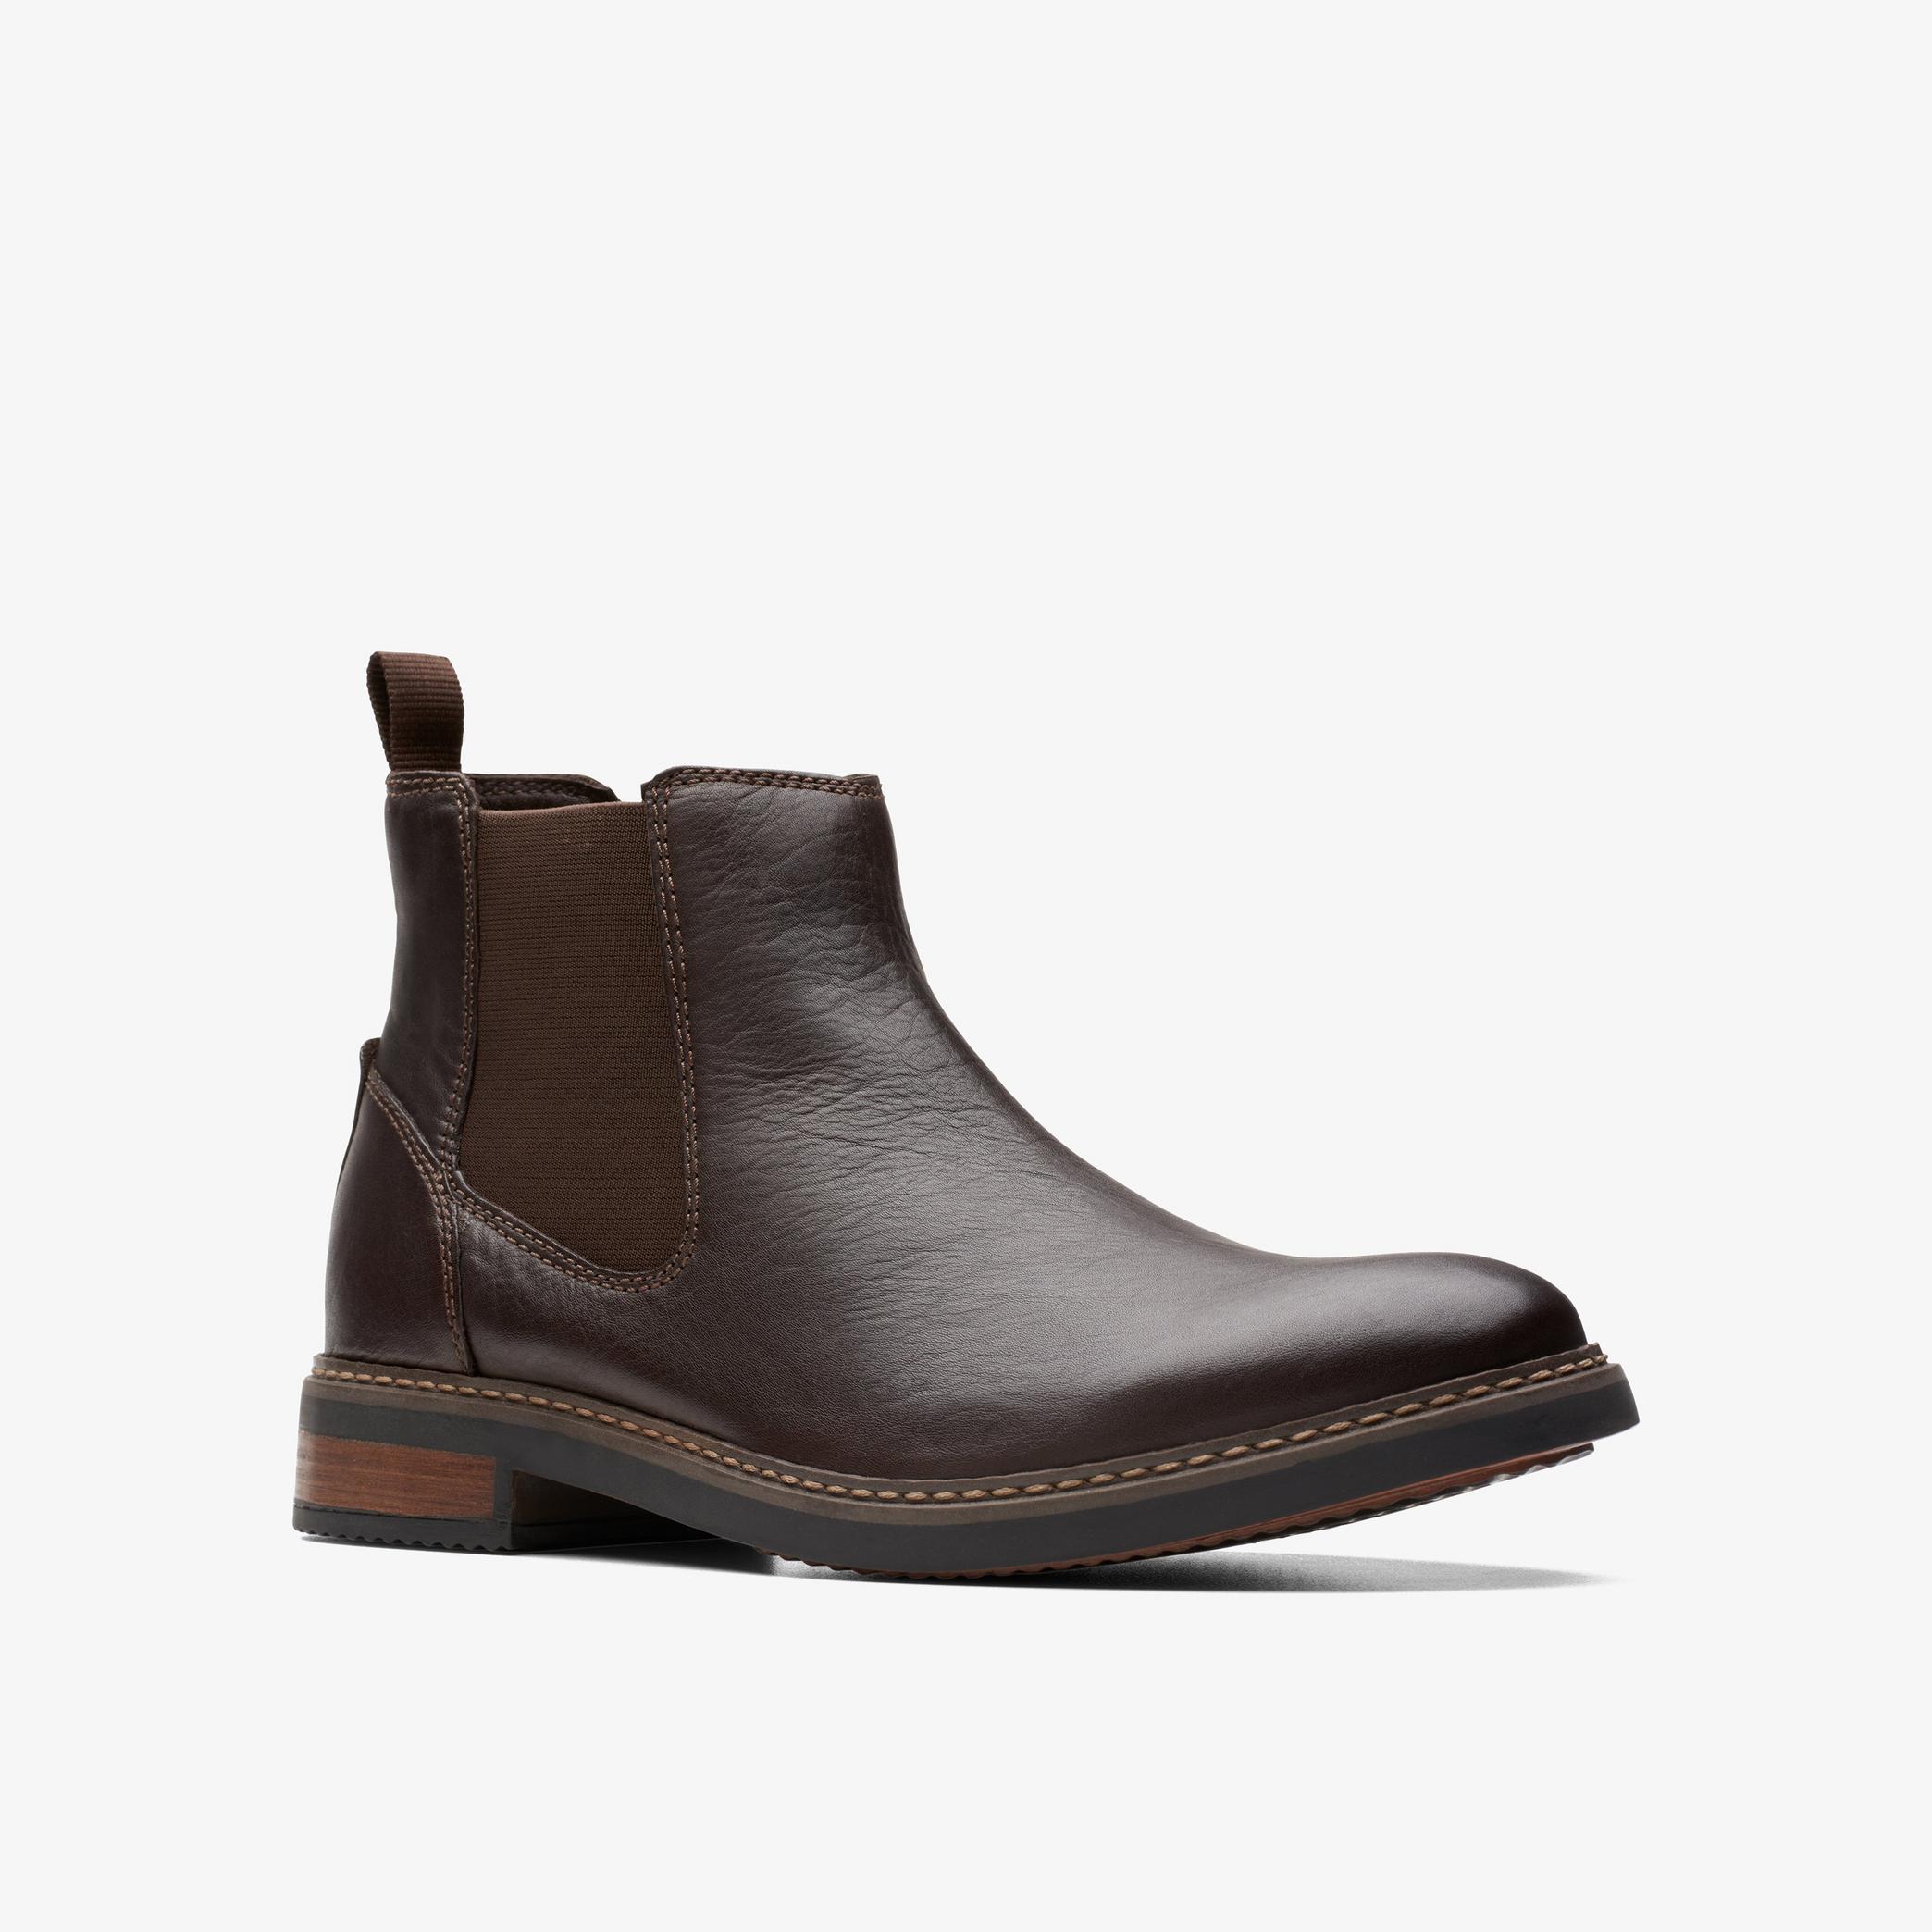 Blackford Top Dark Brown Leather Chelsea Boots, view 3 of 6